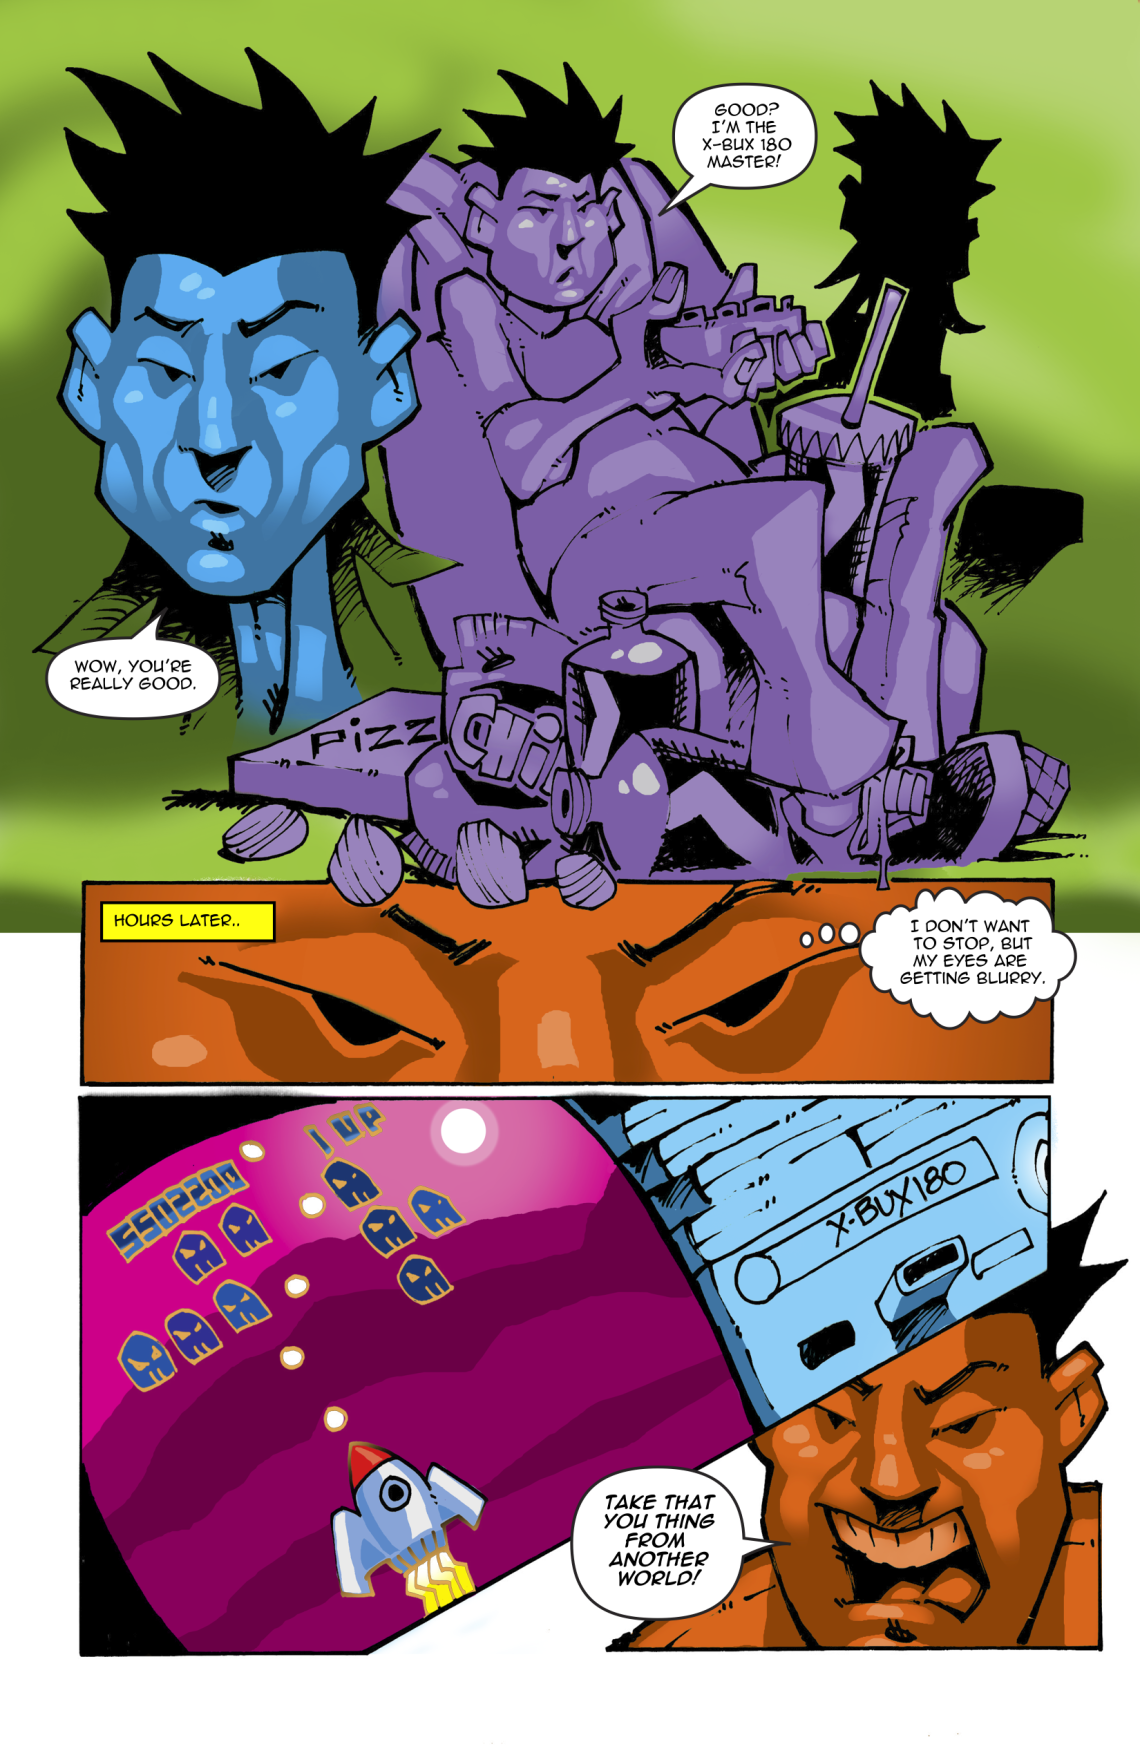 Page 9. They continue to sit on the couch playing video games. Brandon starts to get sleepy.